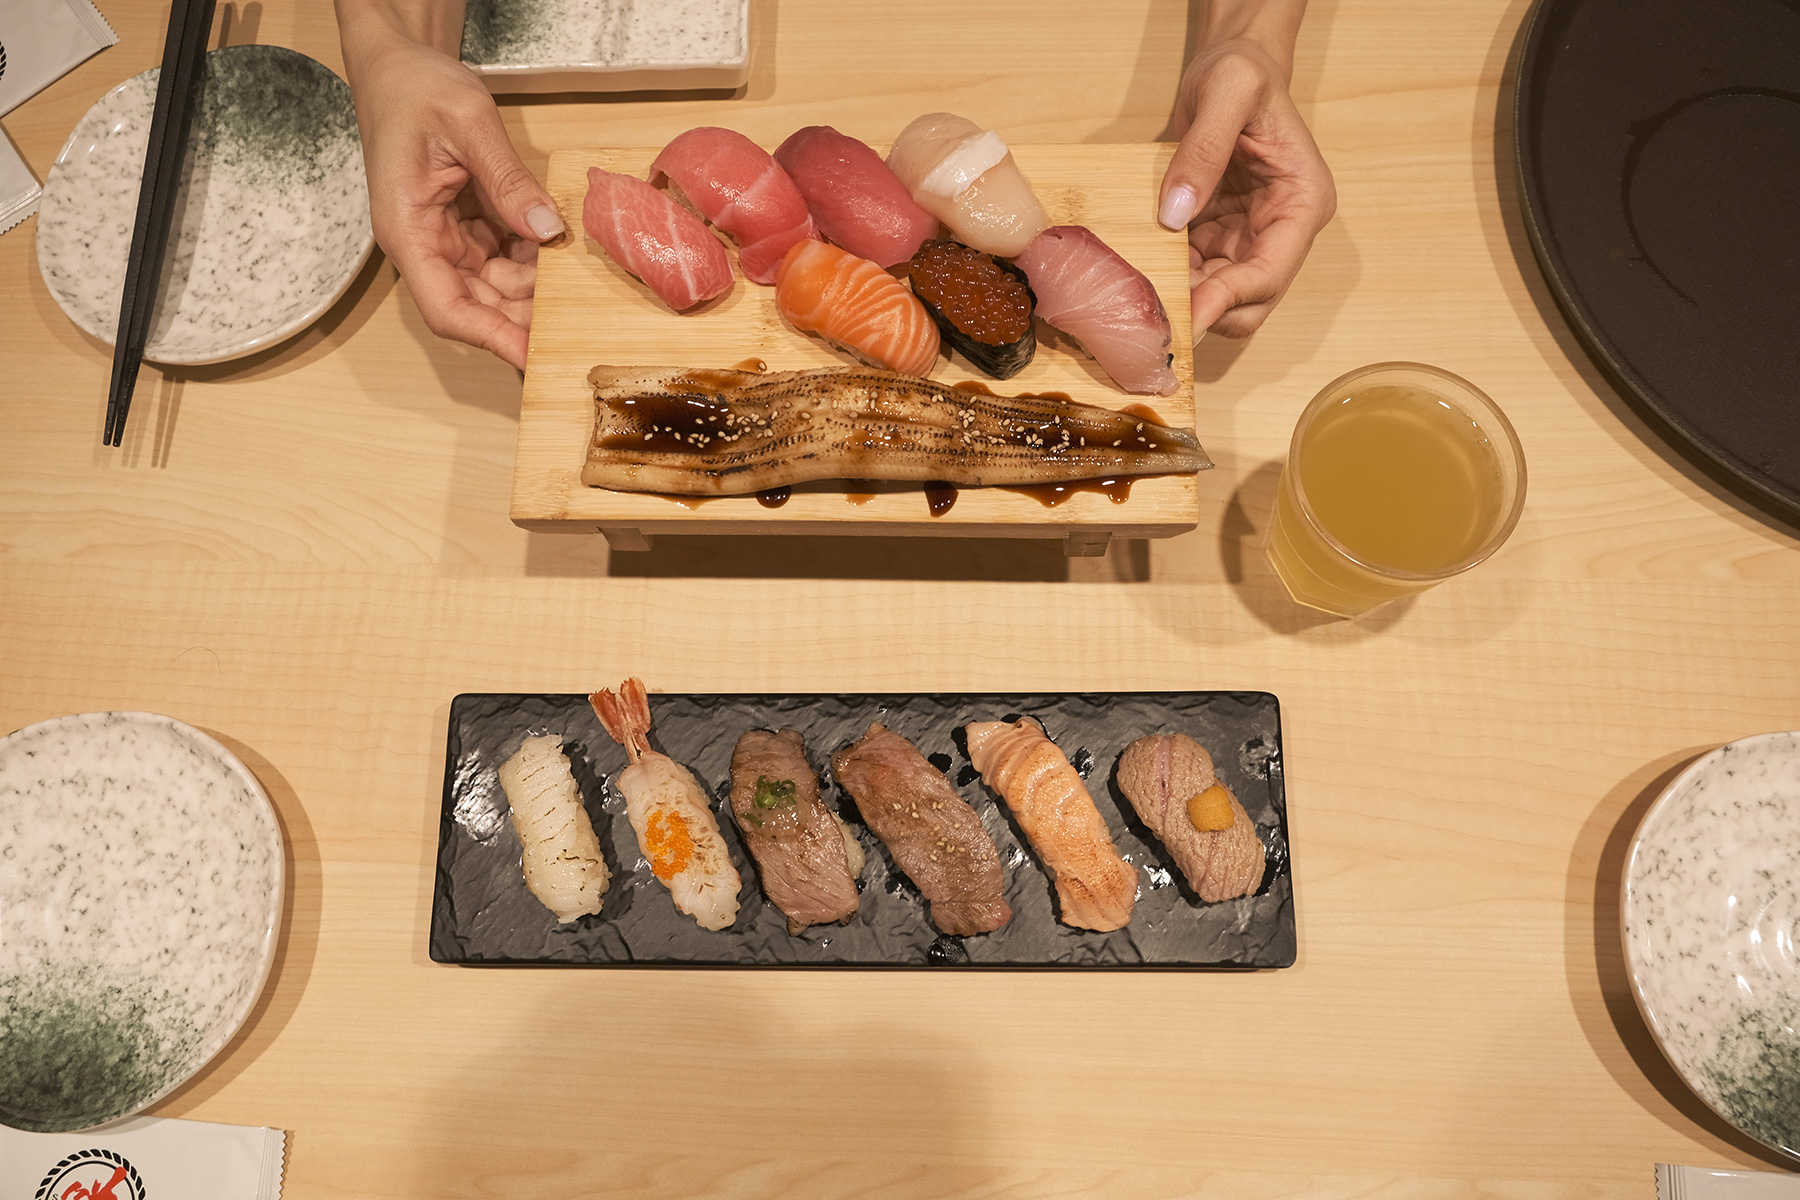 A big fan of sushi? Sen Sen Sushi hits the spot with their range of specialties.